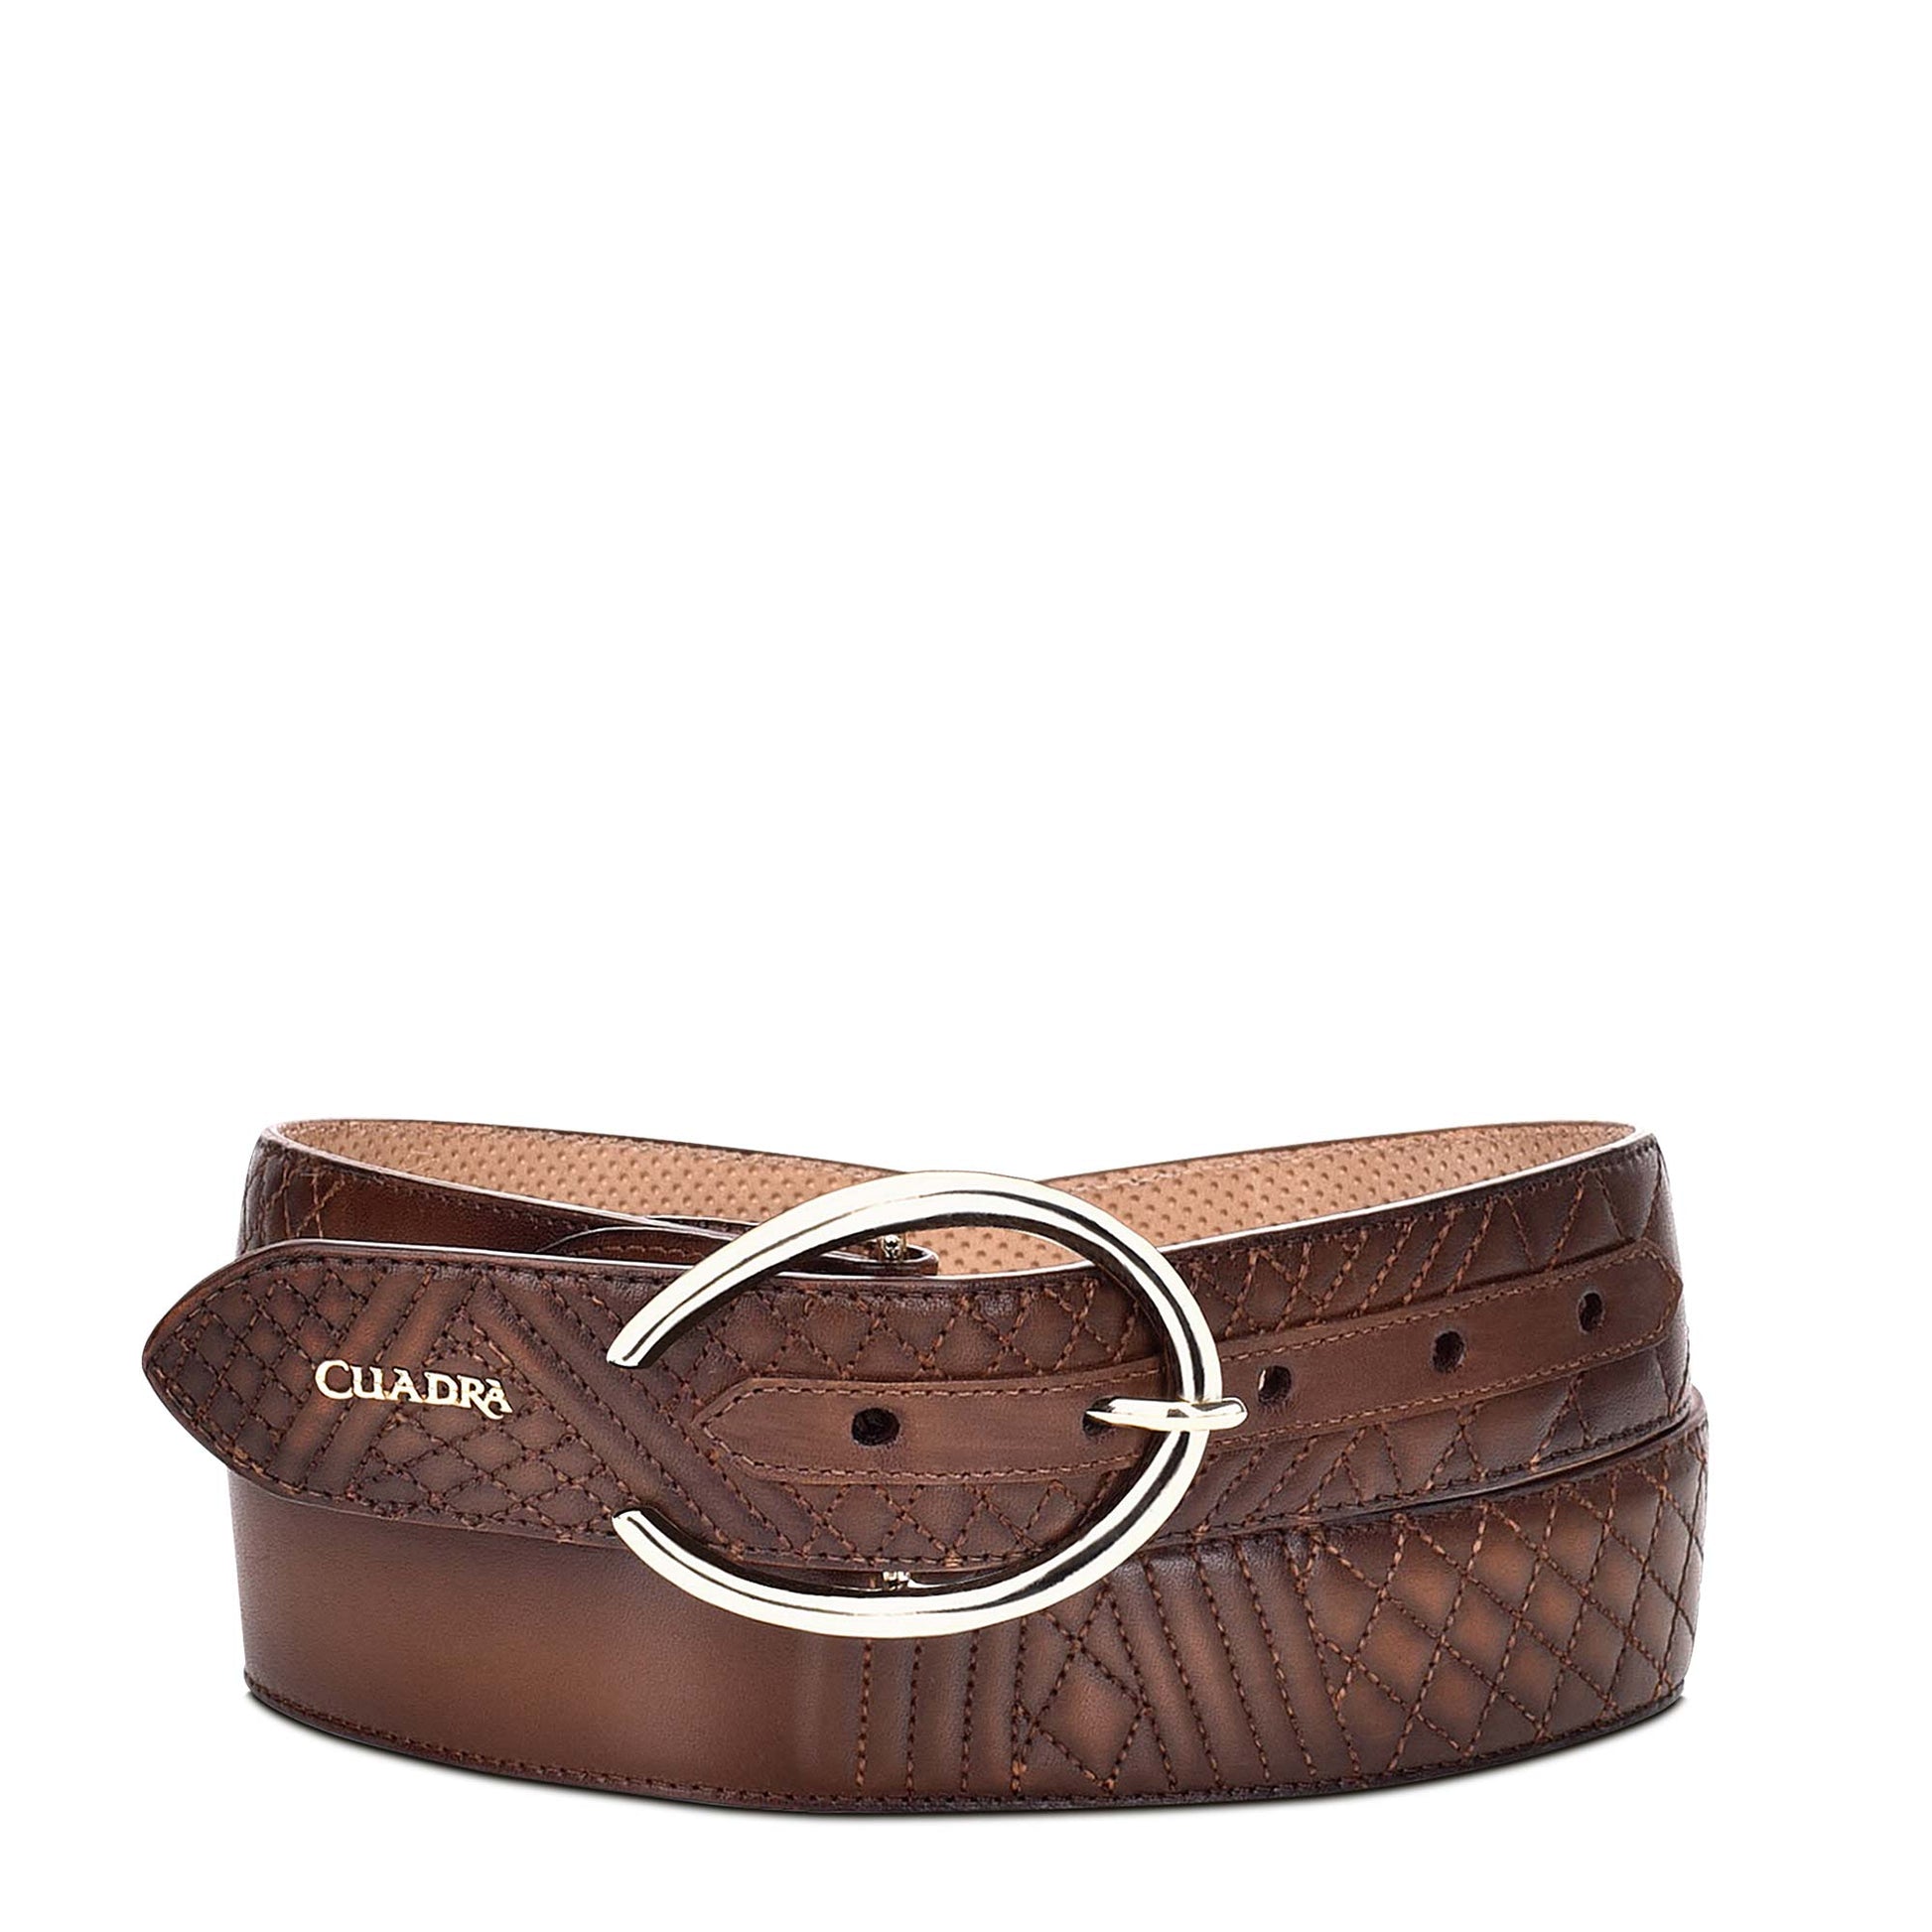 Embroidered brown leather belt, for women- CD923RS - Cuadra Shop